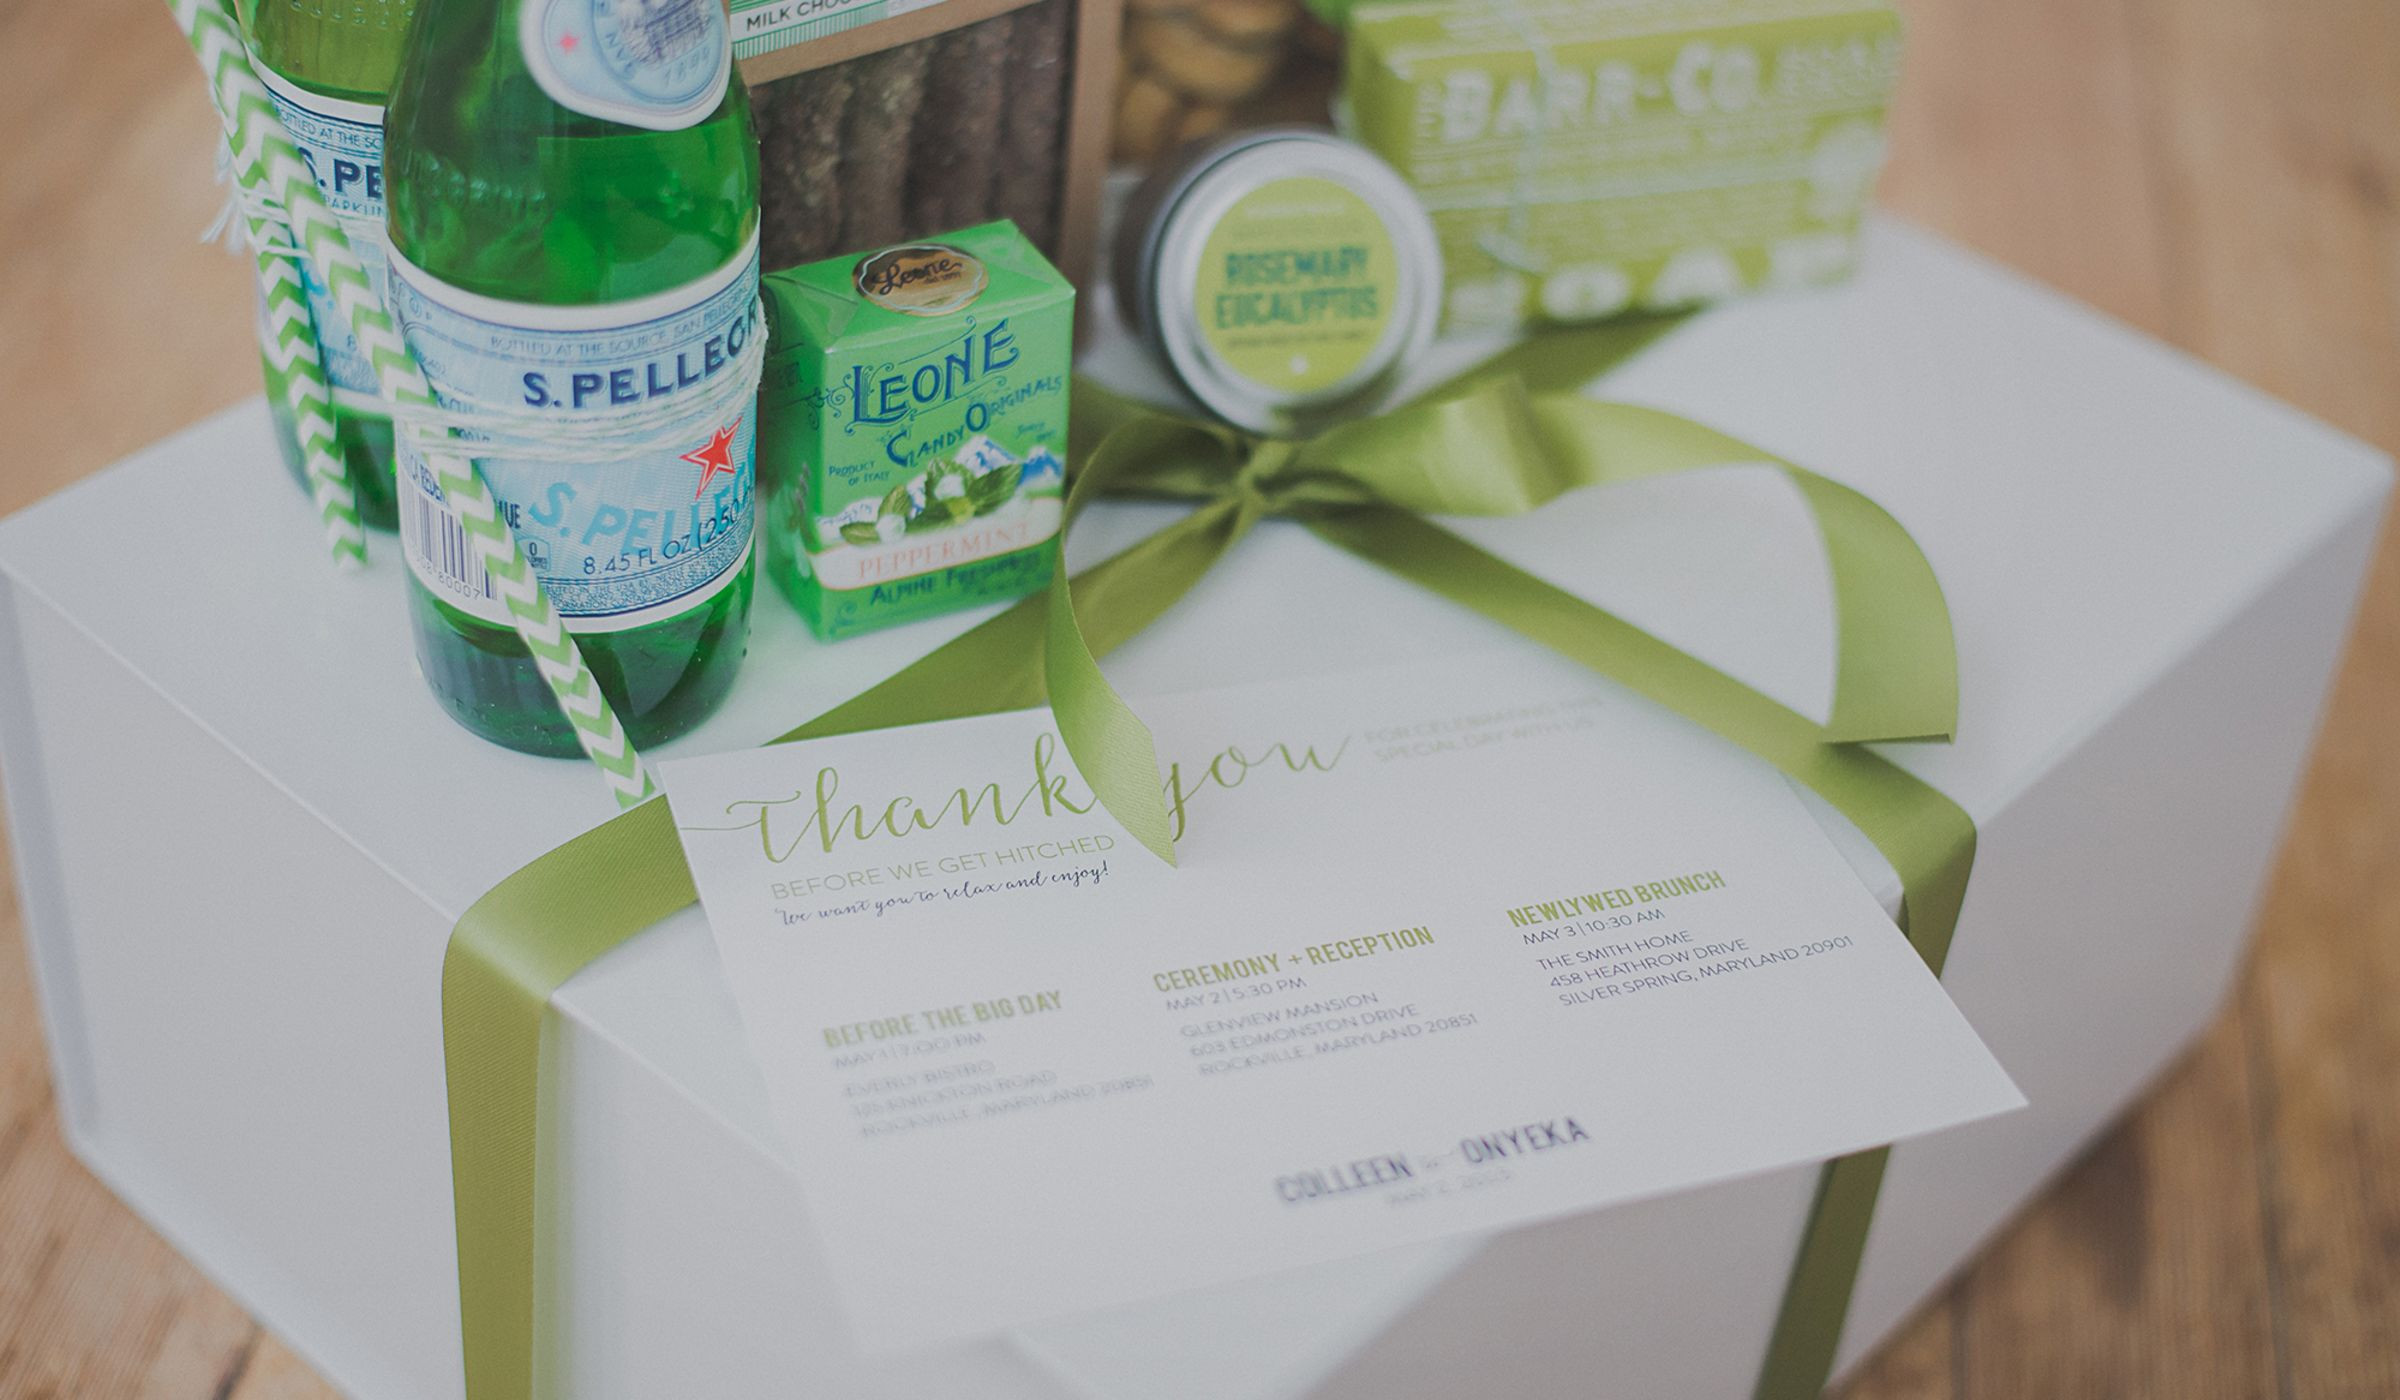 Wedding Shower Hostess Gift Ideas
 18 Bridal Shower Hostess Gifts That Are Bud Friendly